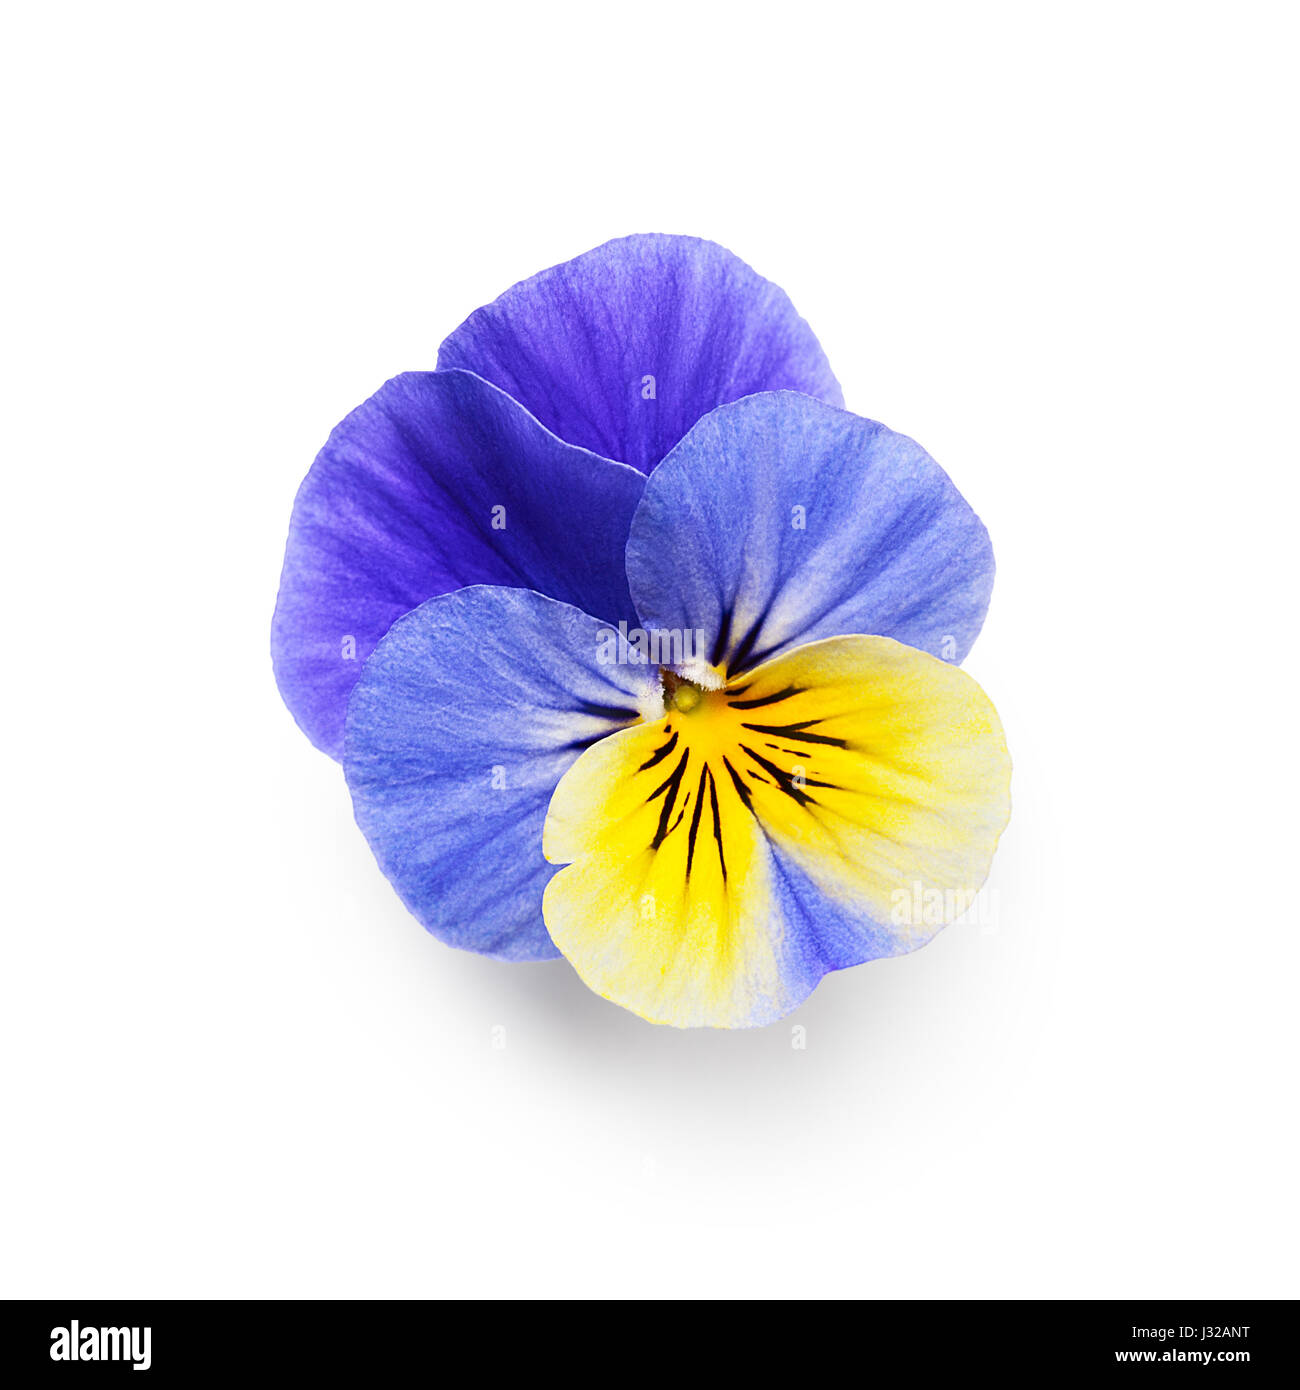 Pansy flower isolated on white background clipping path included. Spring garden viola tricolor Stock Photo